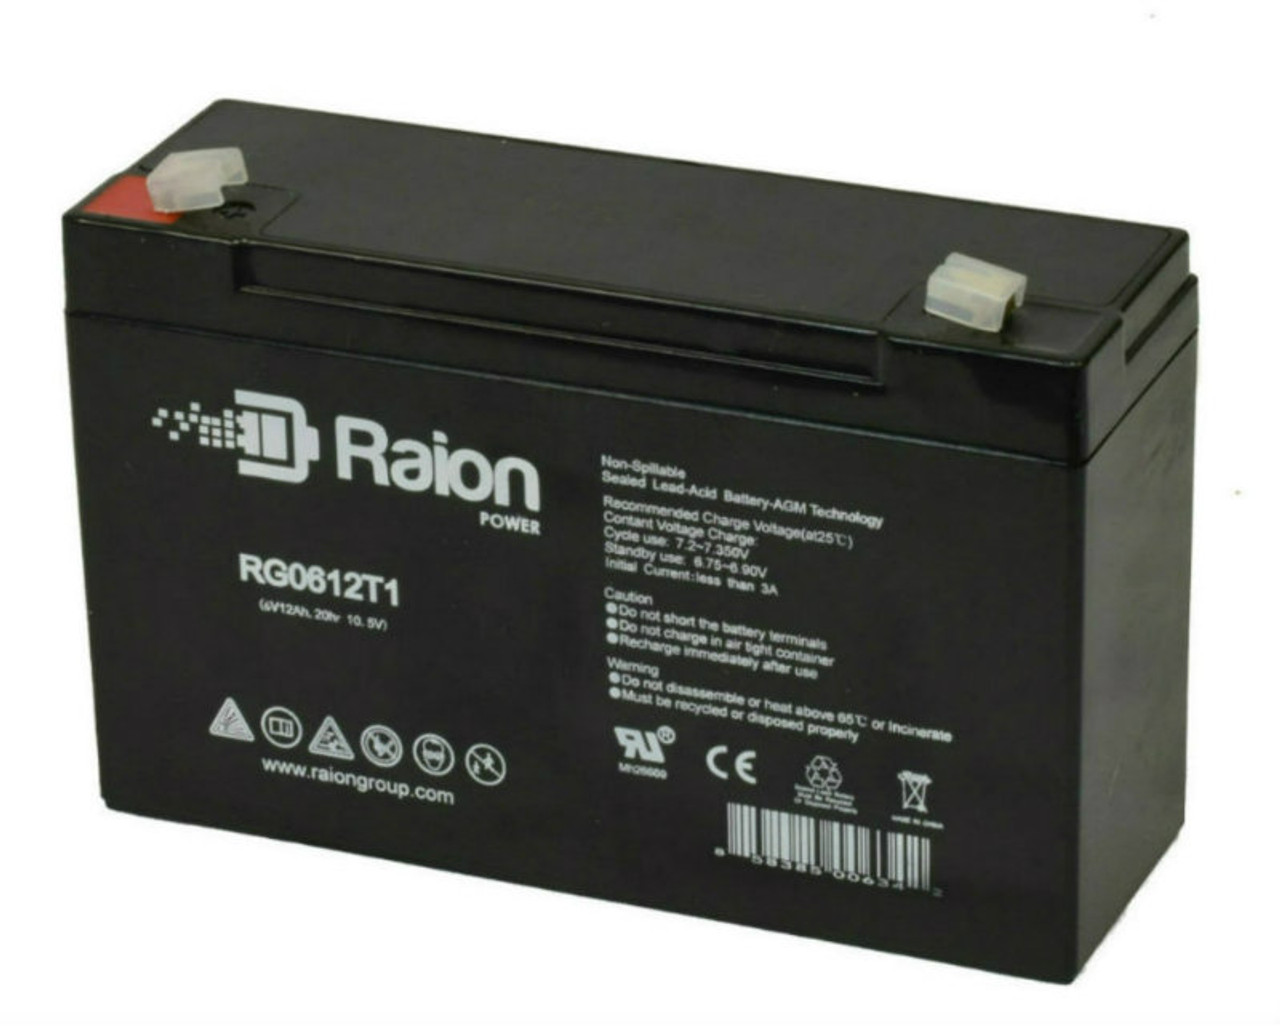 Raion Power RG06120T1 Replacement Emergency Light Battery for York-Wide Light A2E1